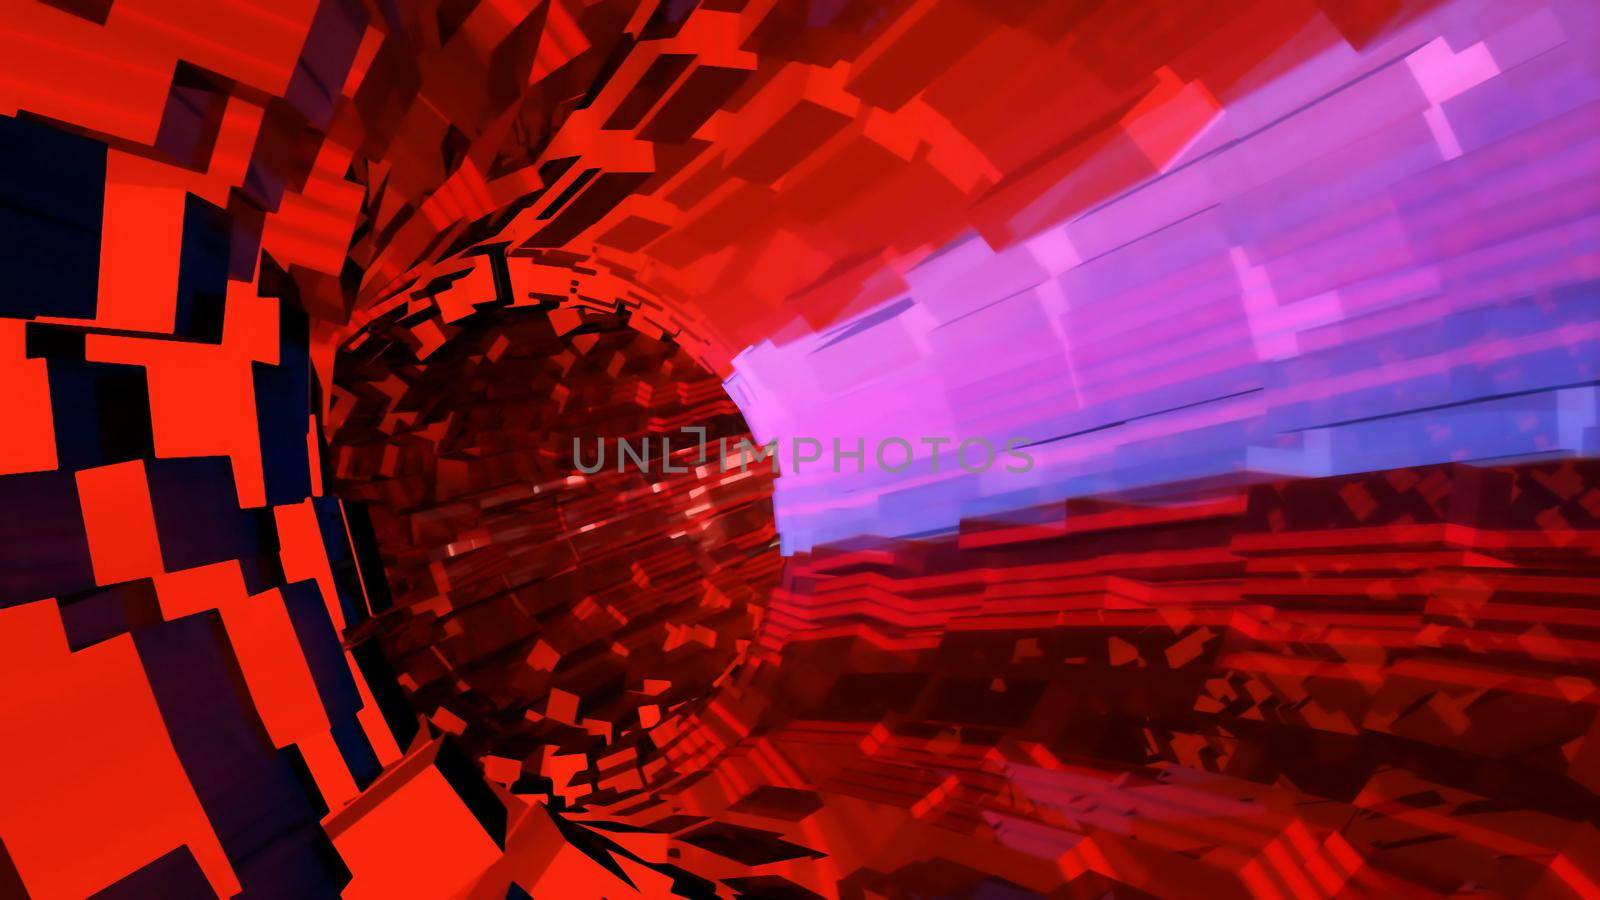 Abstract background with flight in sci-fi tunnel.